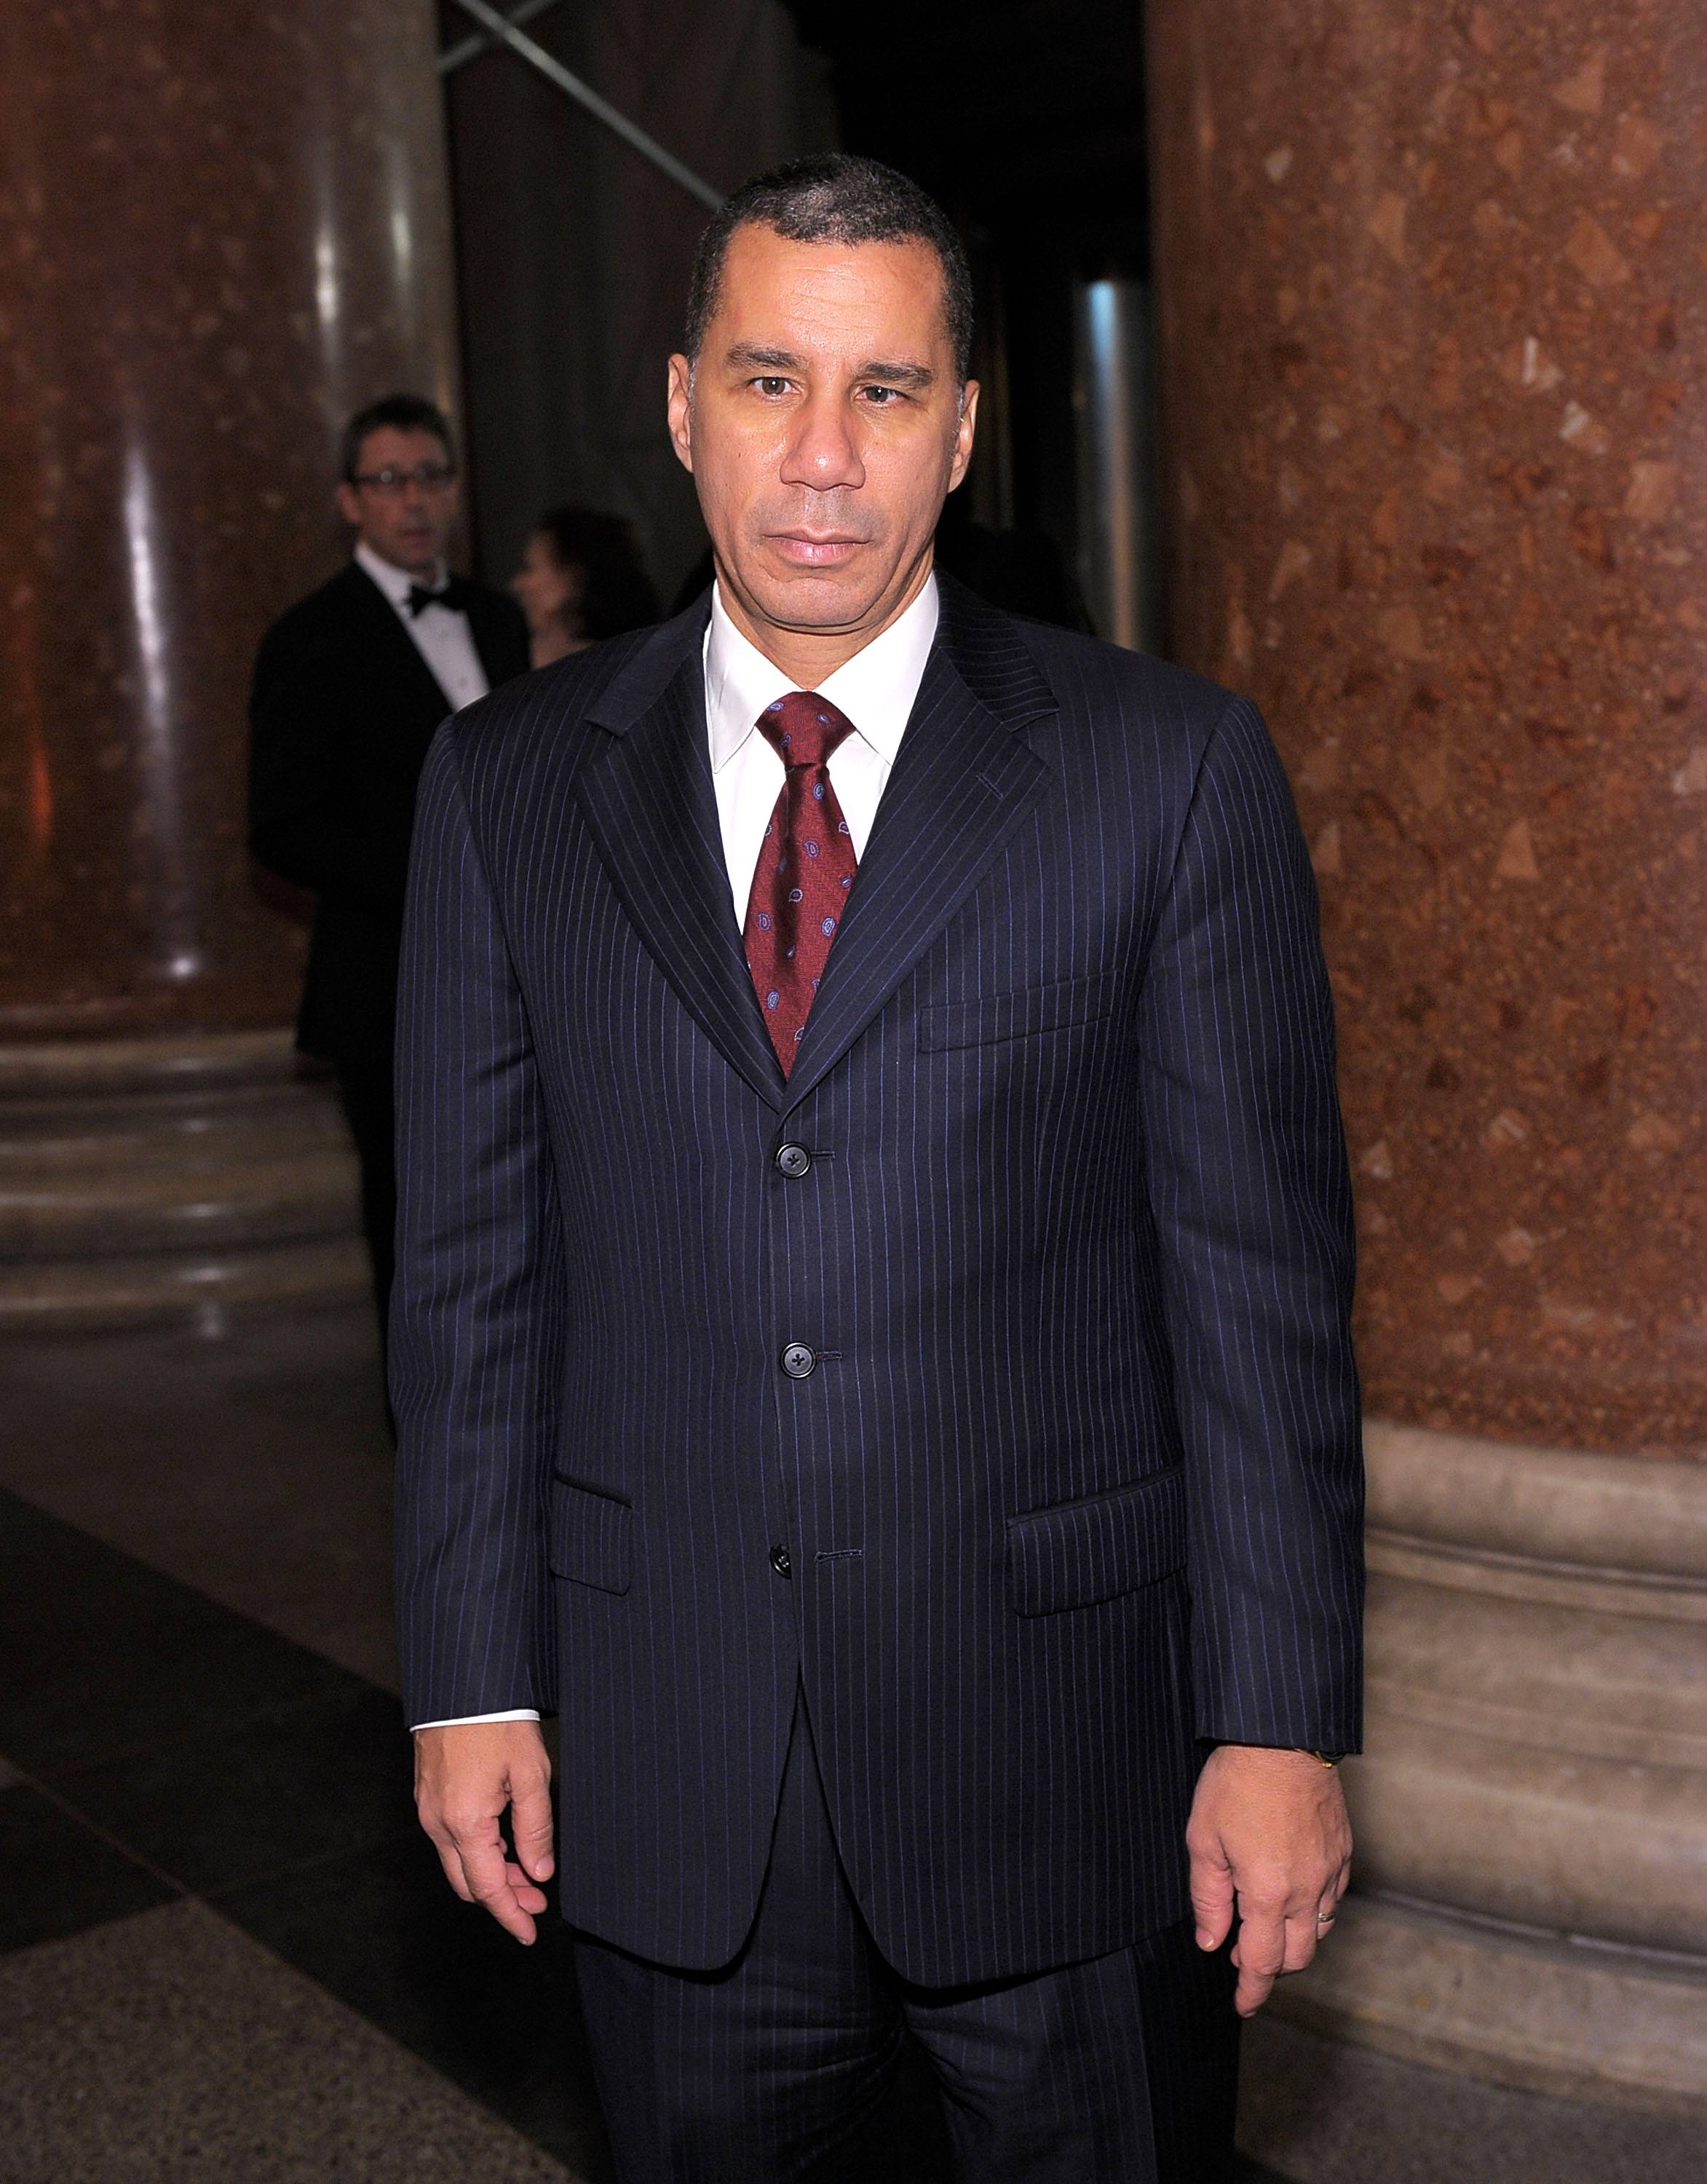 David Paterson - On his first day as New York governor, David Paterson admitted that he had multiple affairs as a married man. In fact, he and his wife had each admitted affairs to the press days earlier. The former Lt. governor assumed the top job when Gov. Eliot Spitzer resigned after his infidelities became public.